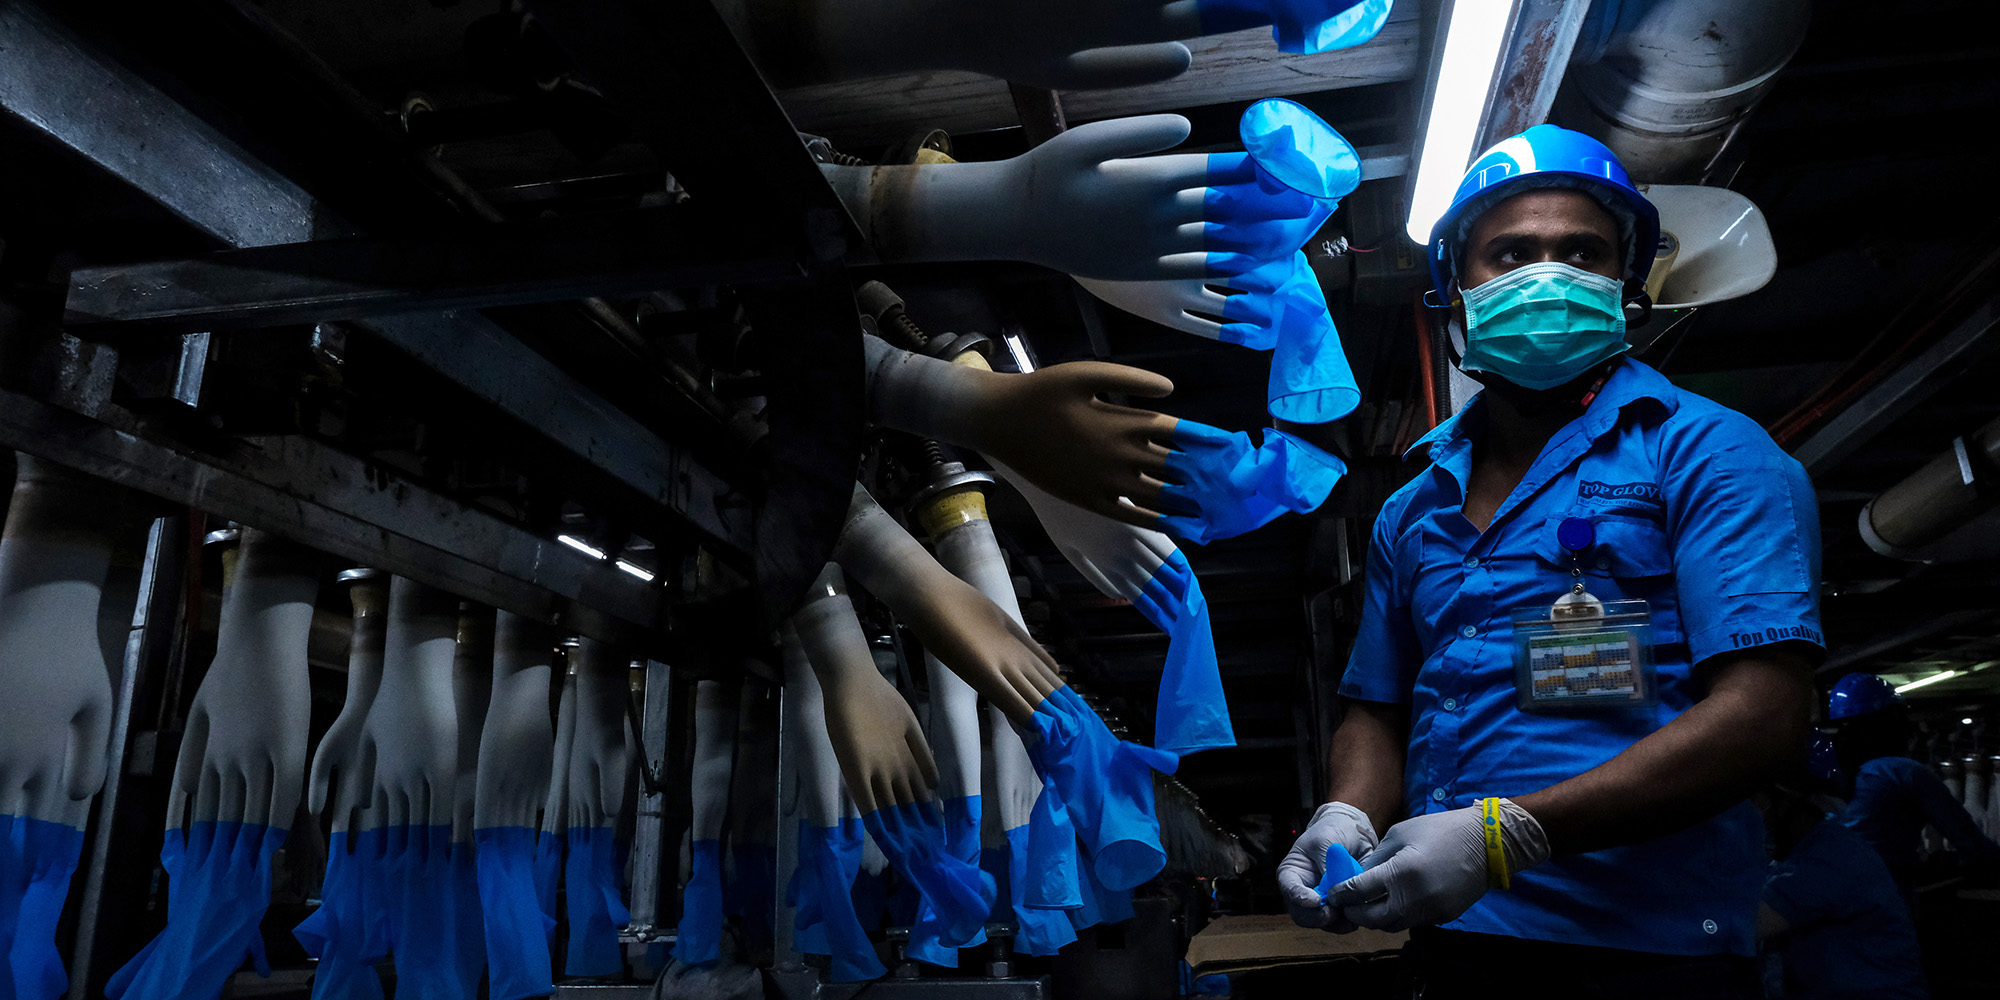 An employee monitors latex gloves on&nbsp;molds&nbsp;at a glove factory in Setia Alam, Selangor, Malaysia, on Feb. 18.